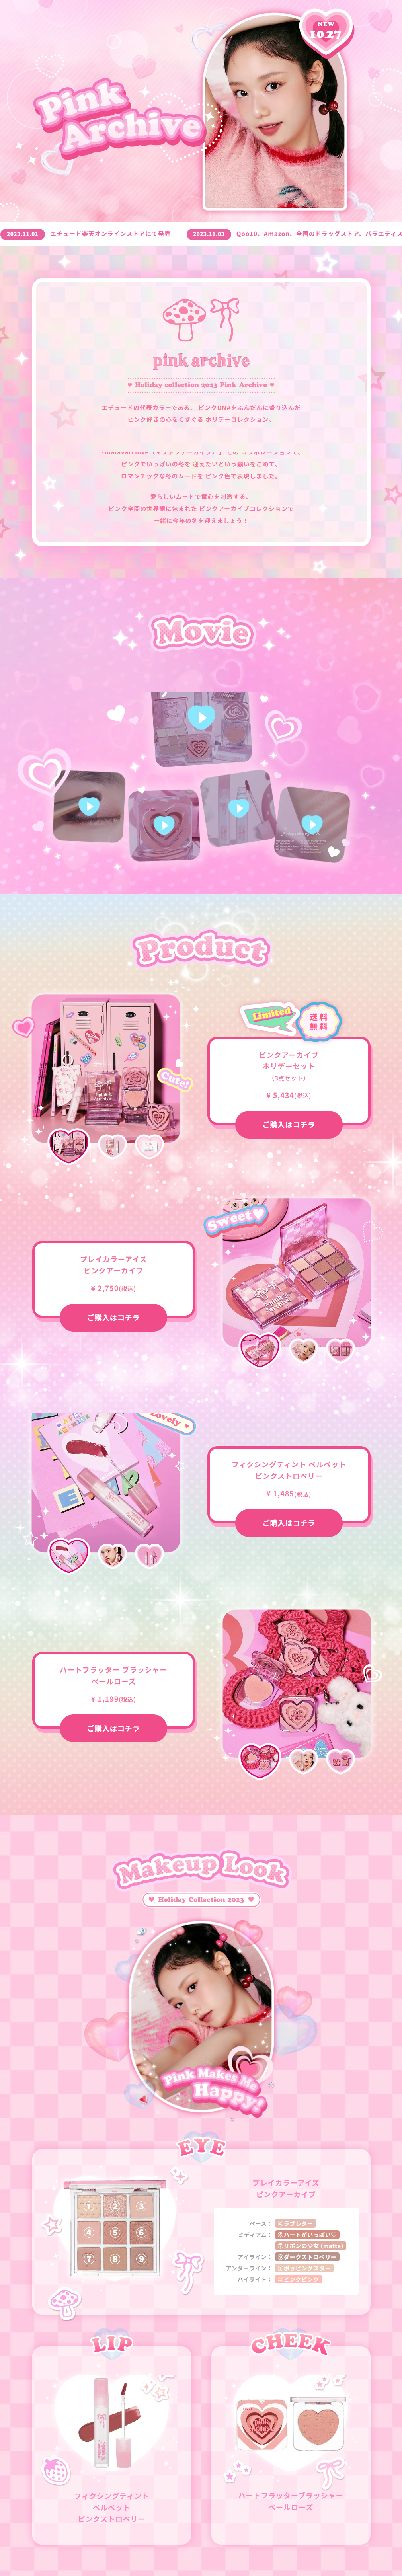 Pink Archive_pc_1